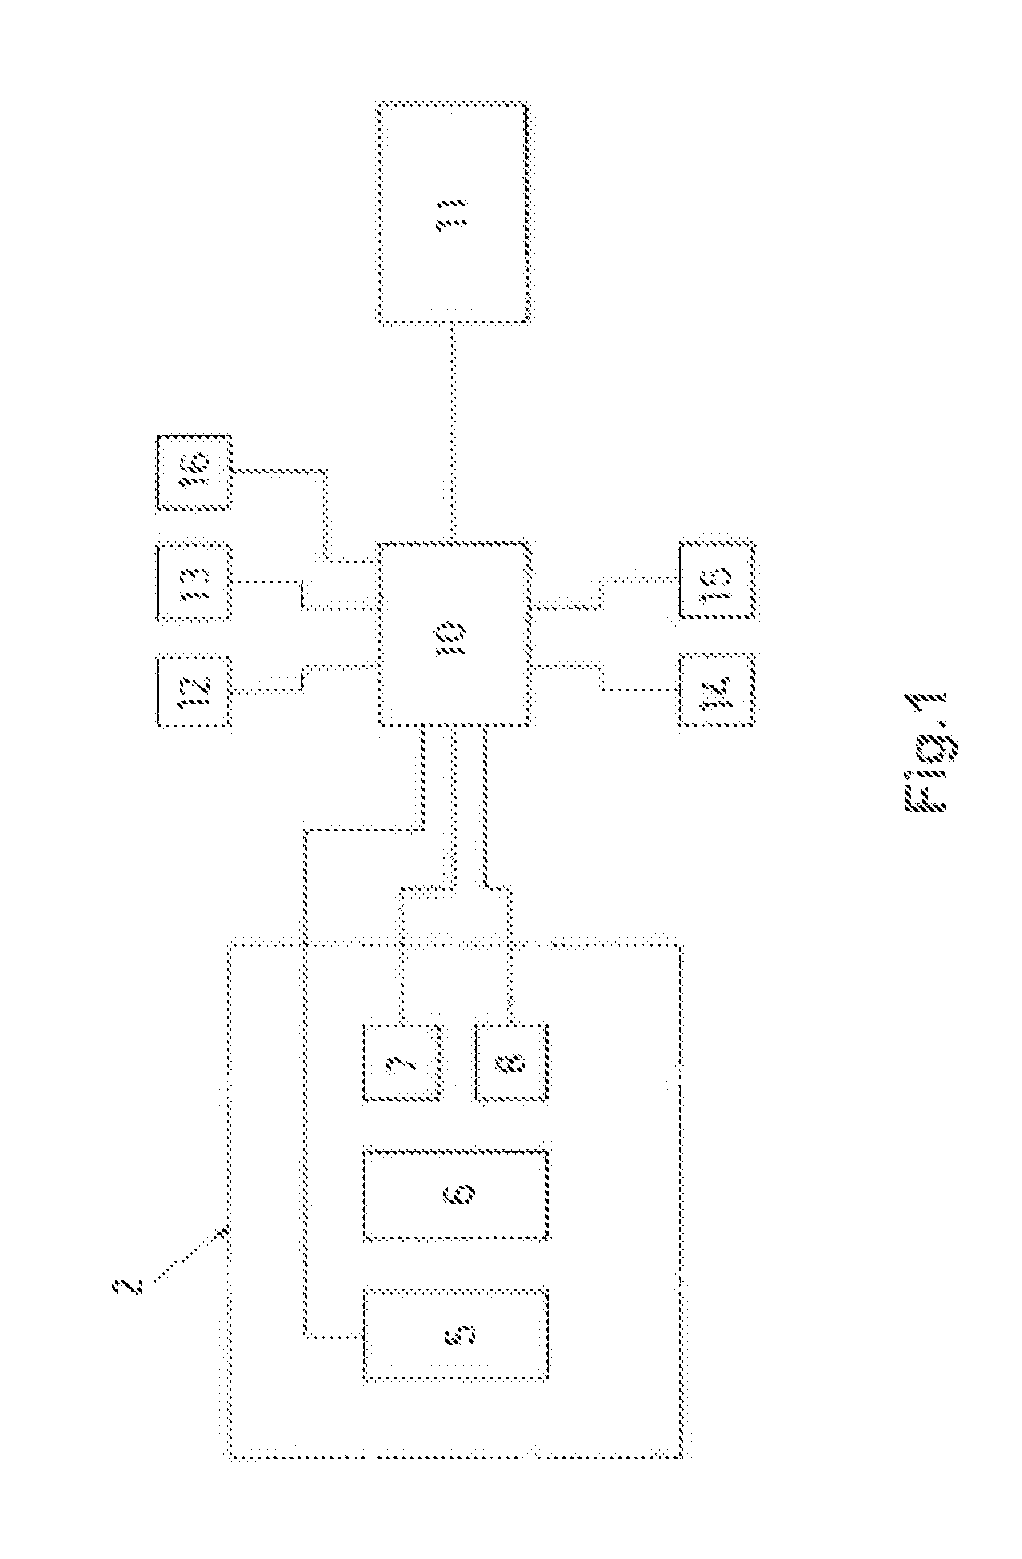 Equipment and method for examining, diagnosing, or aiding the diagnosis, and therapy of functional vision problems